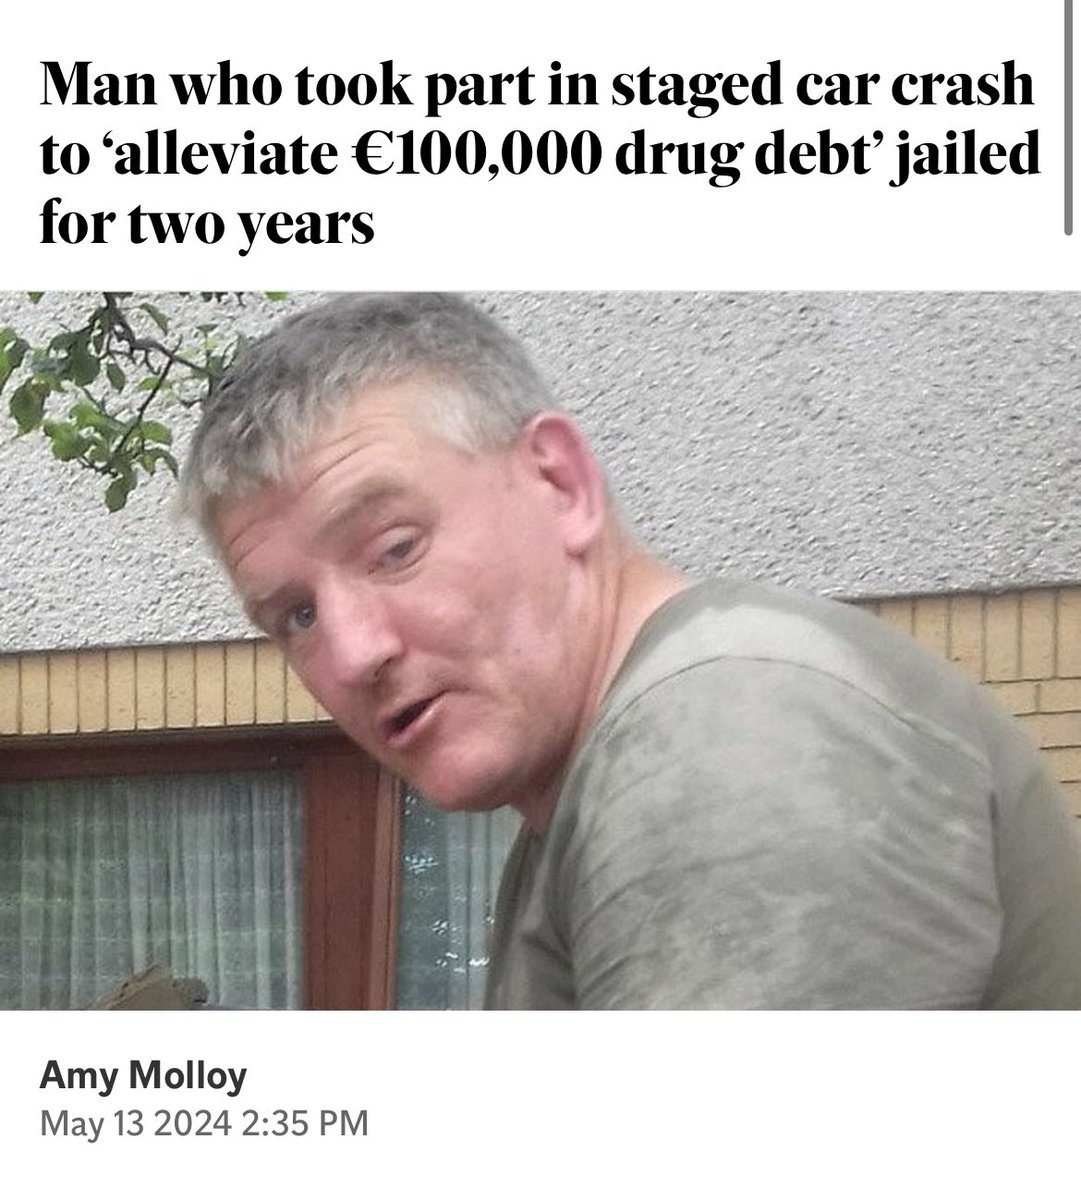 A strong message to those tempted to commit insurance fraud. It is vital that suspect claims are challenged by all insurers in this robust way. 

Unfair claims hurt us all.

#InsuranceReform 

independent.ie/irish-news/cou…